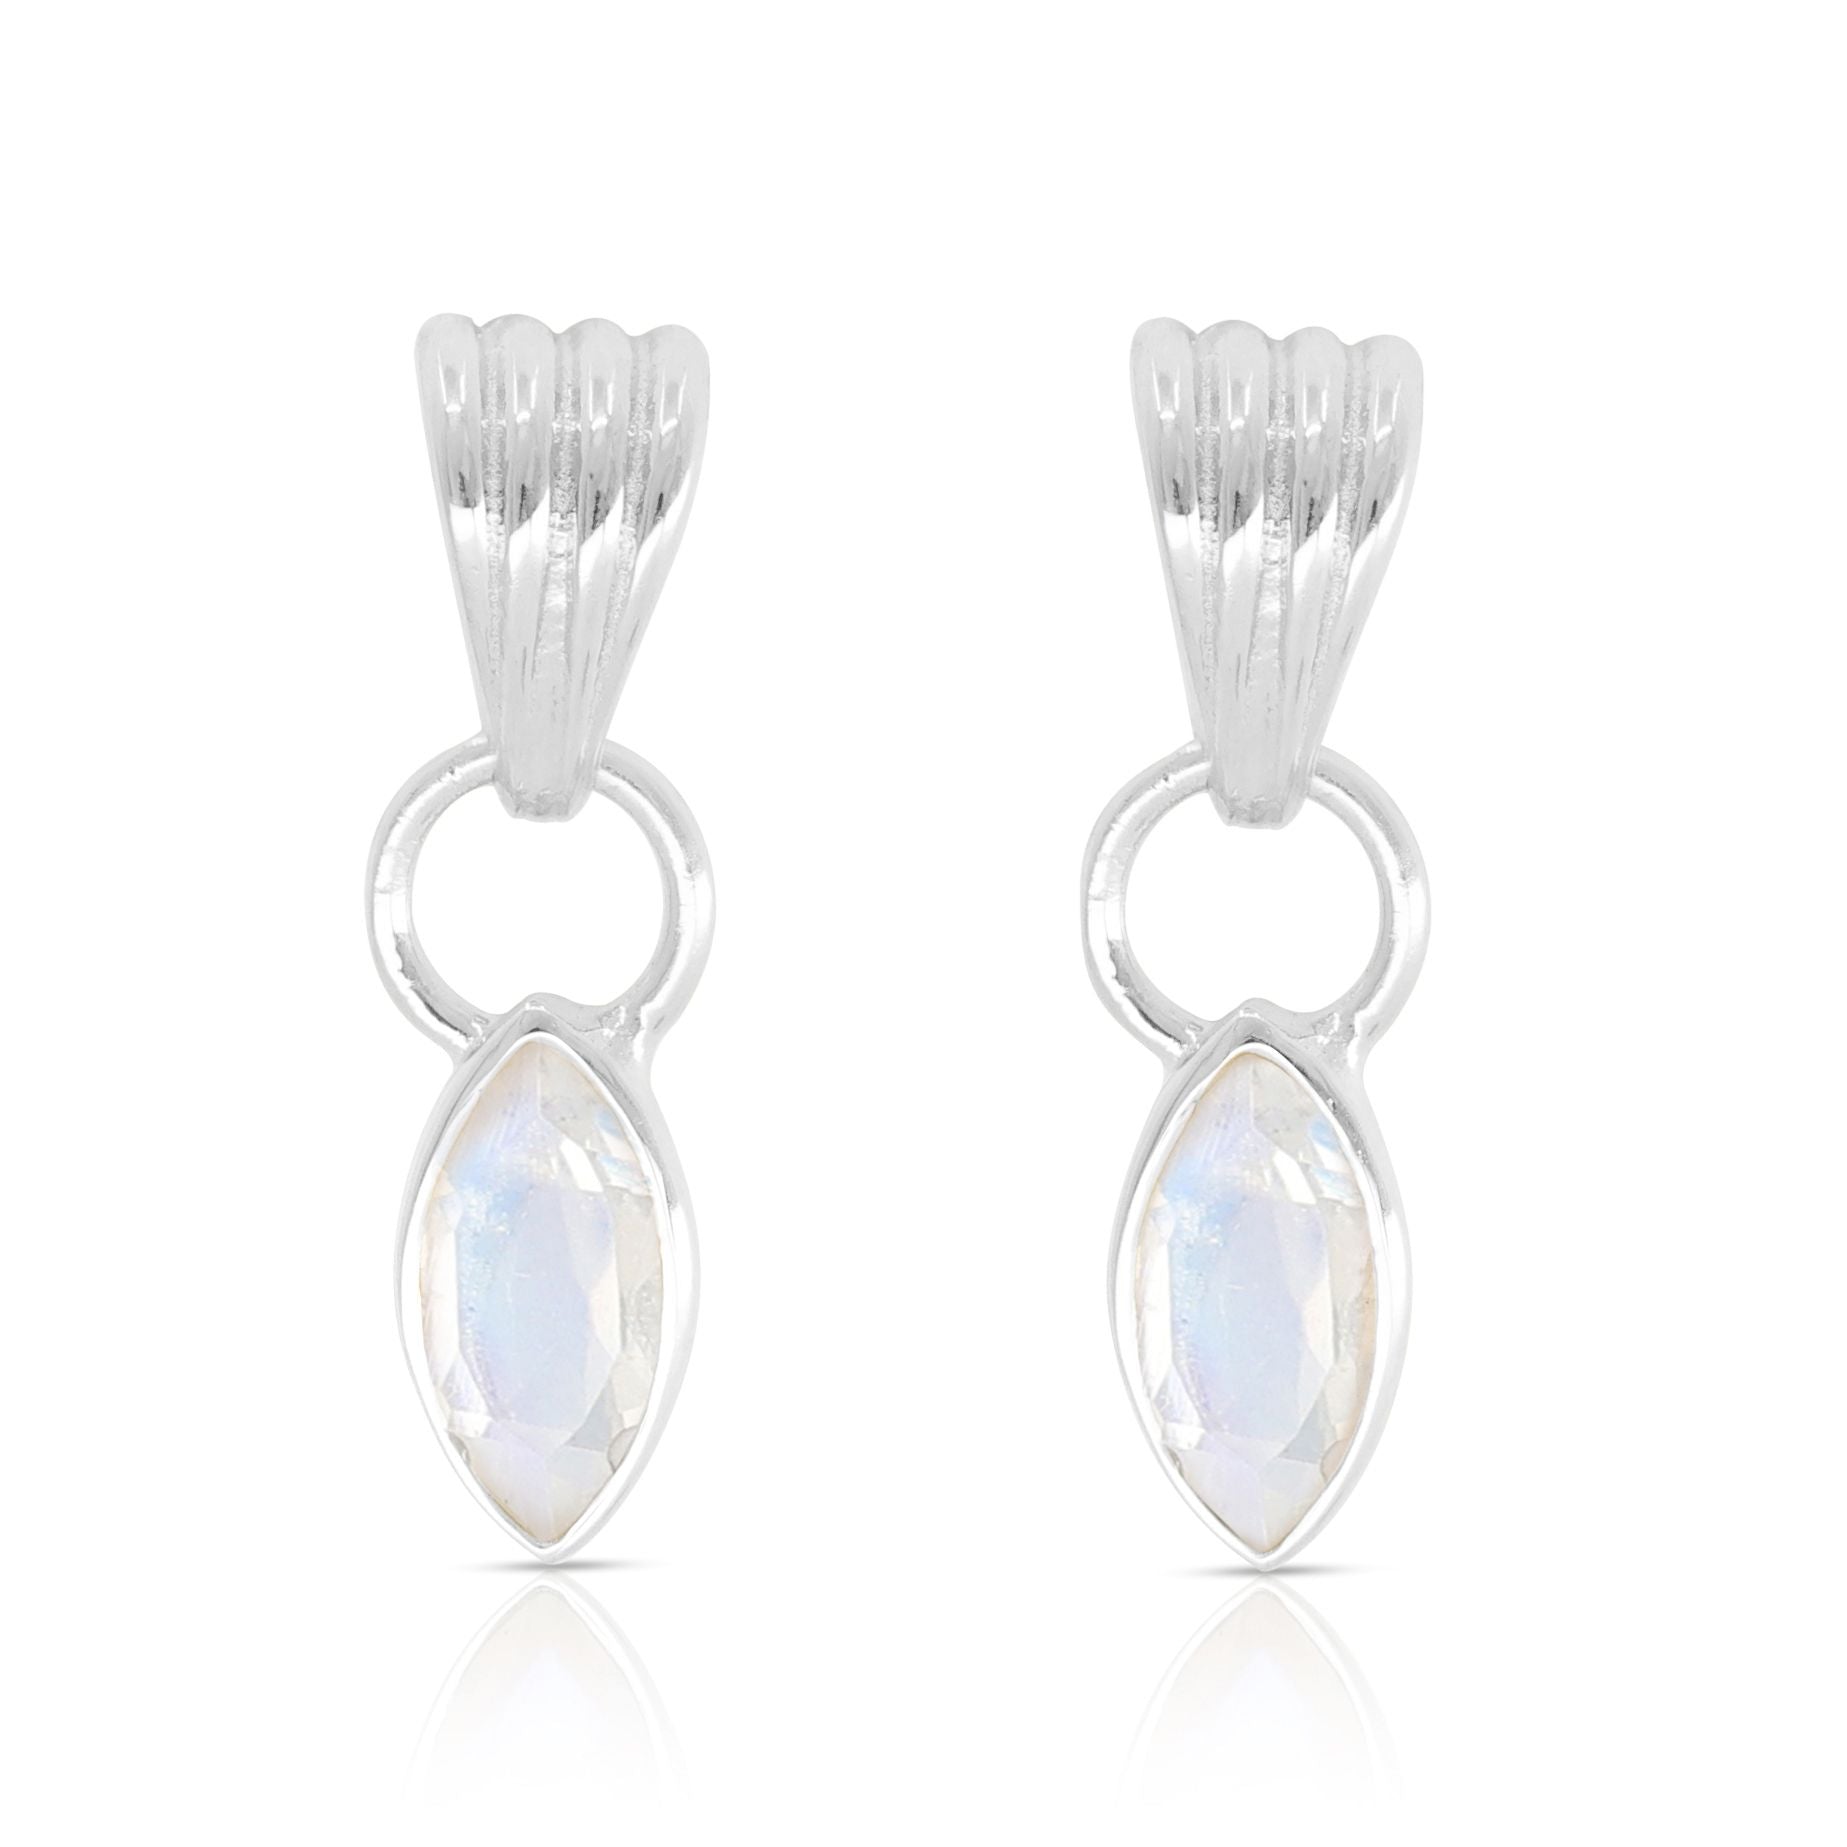 Toni May Camille Moonstone Silver Earrings